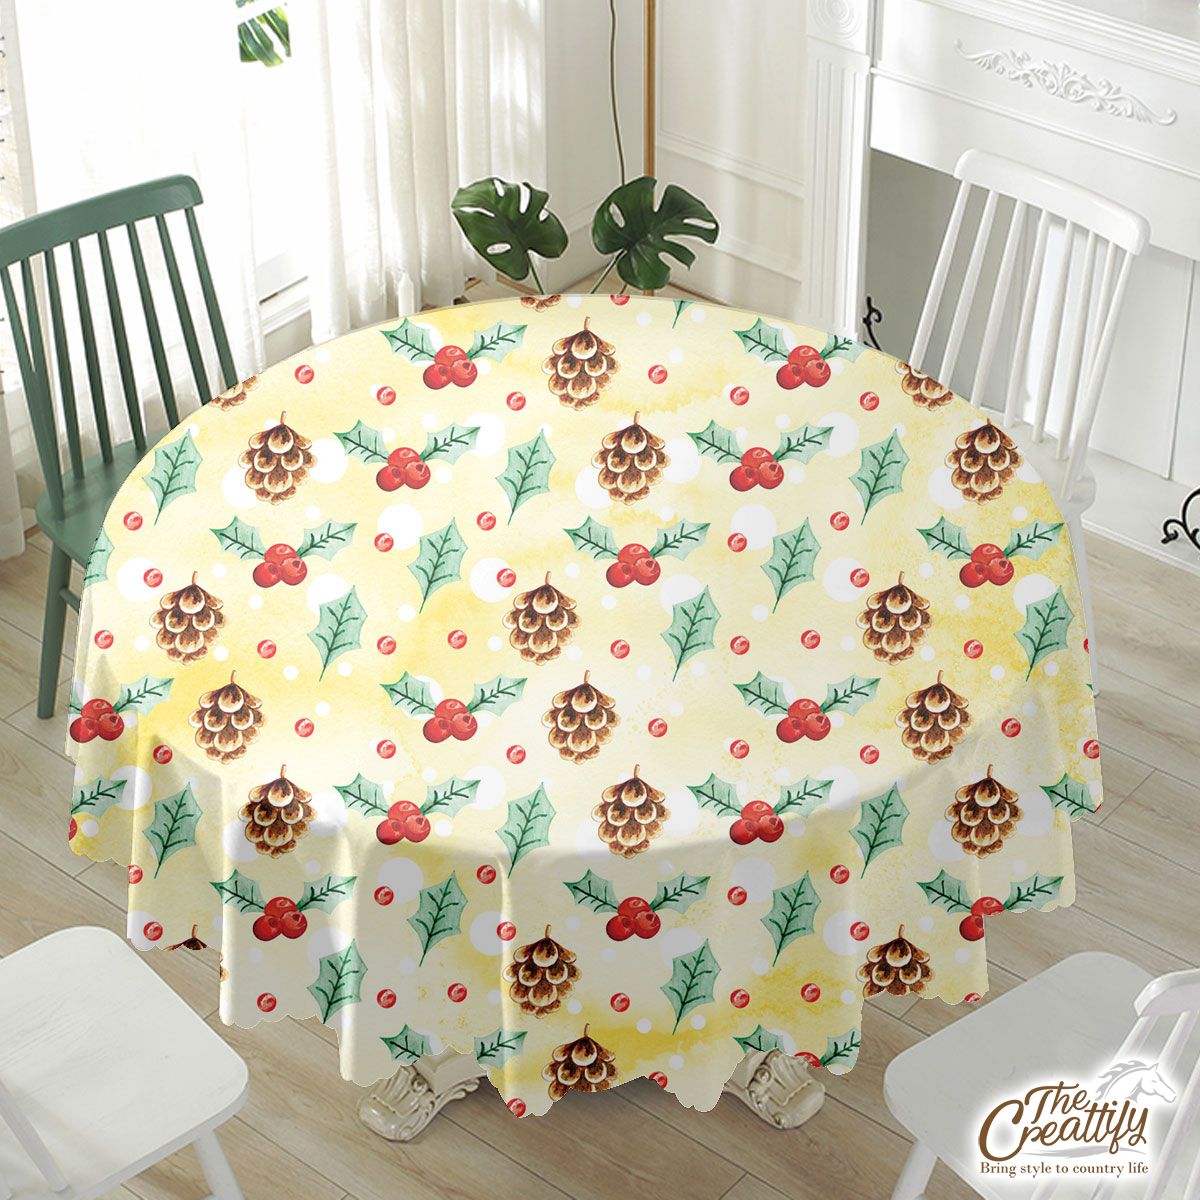 Holly Leaf, Pine Cone, Holly Berry Waterproof Tablecloth